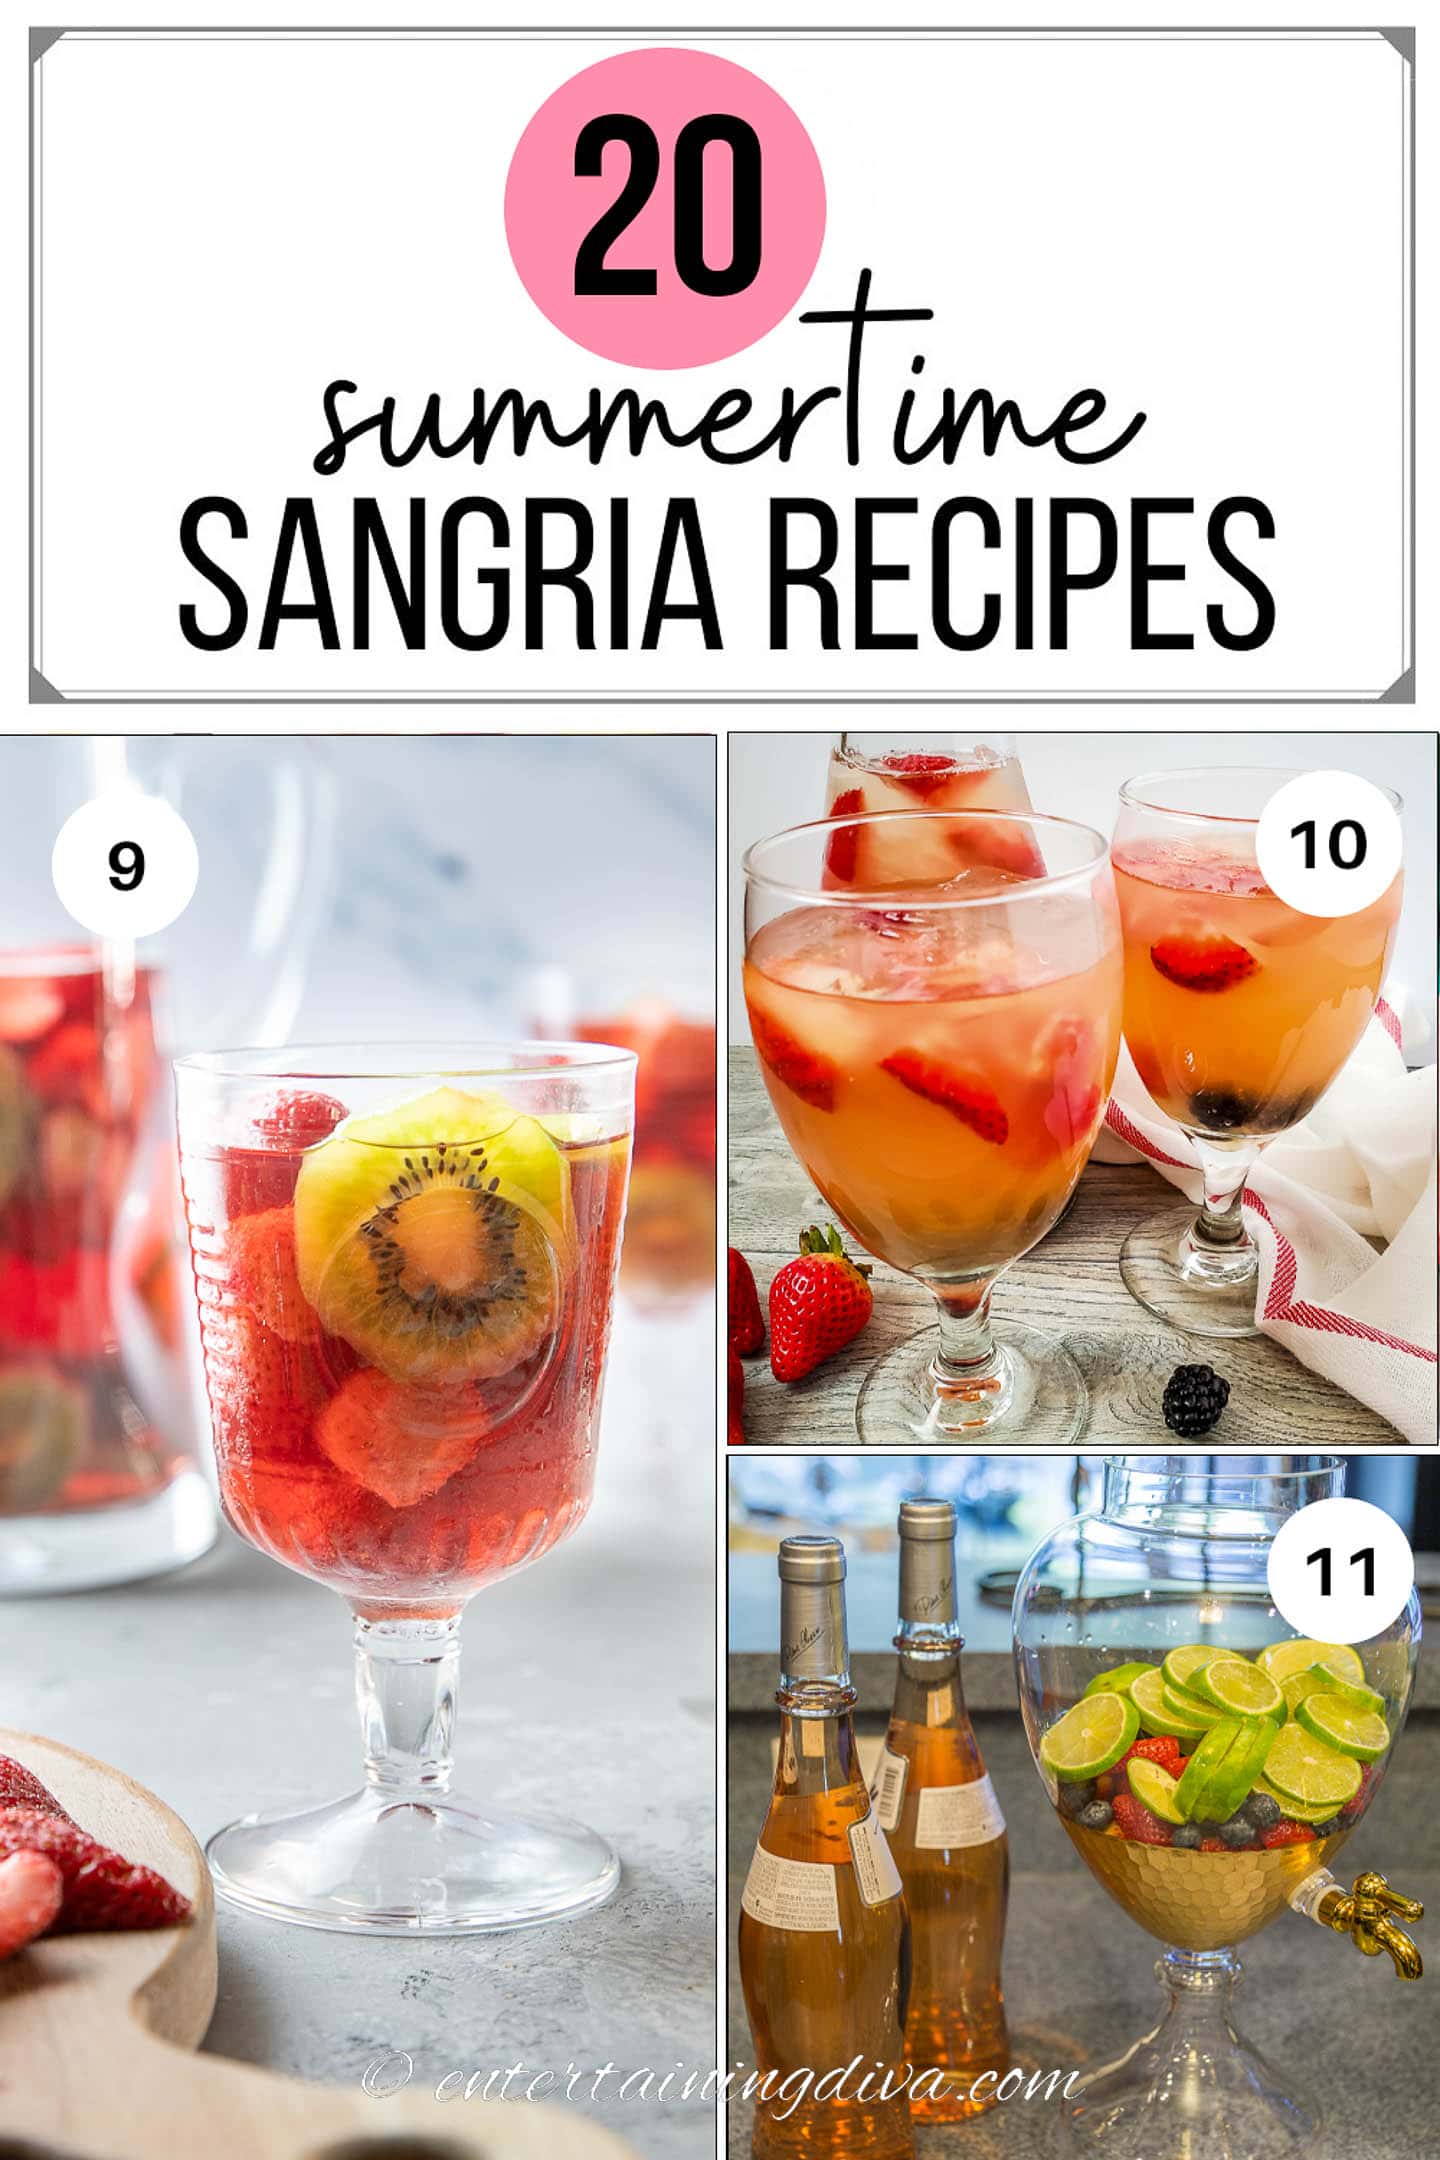 3 pictures of summer sangria recipes- kiwi strawberry sangria in a glass, triple berry sangria in glasses, berries and lime sangria ingredients - with the text summertime sangria recipes on the top